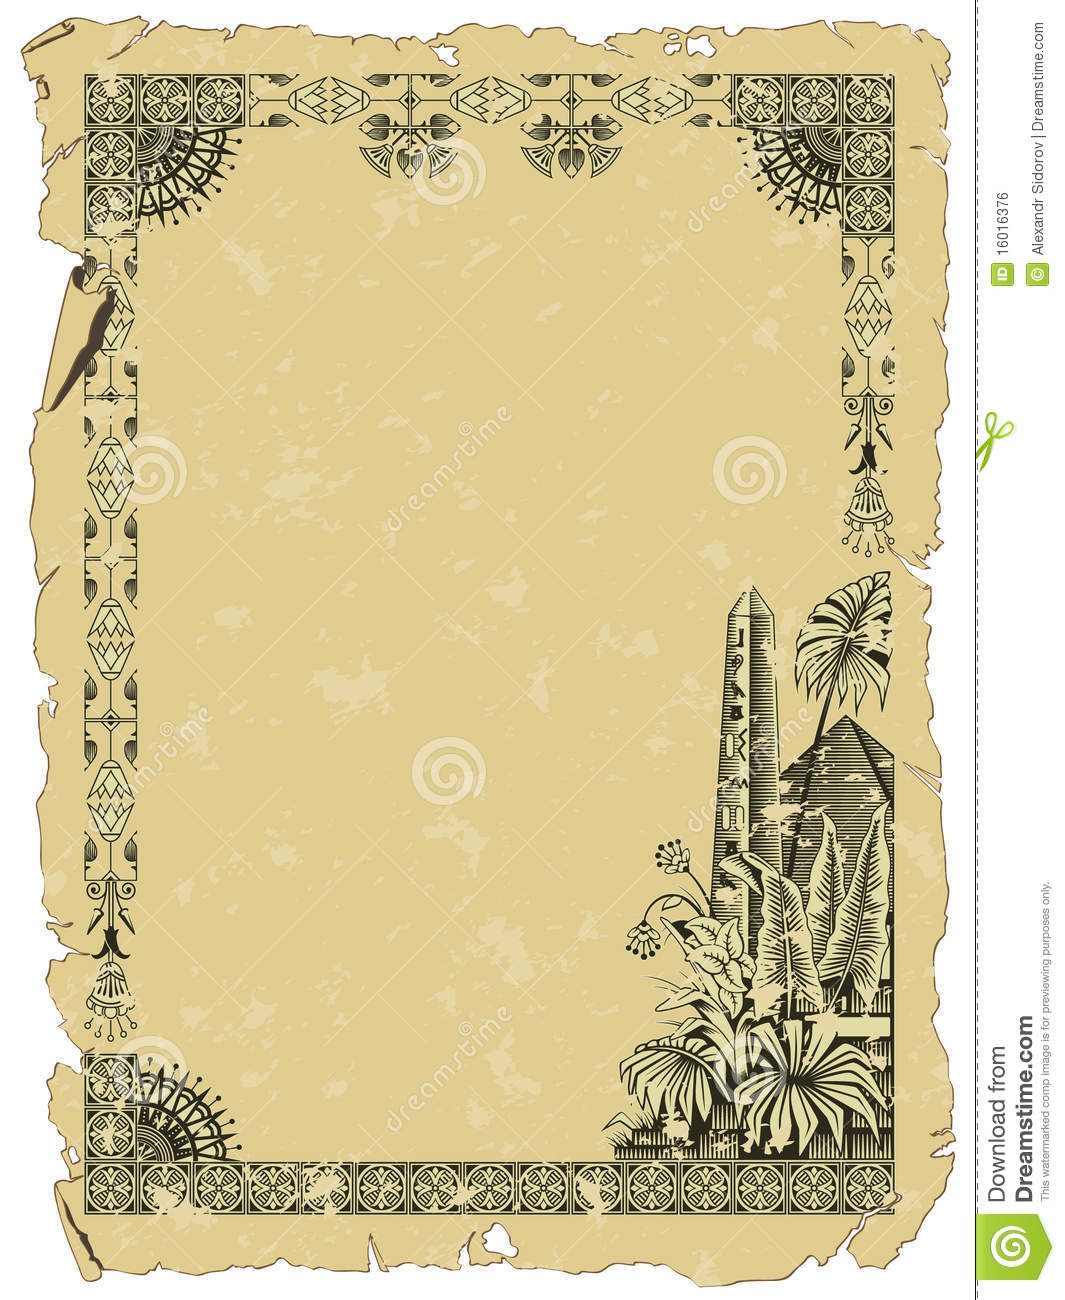 Vector Background Ancient Egypt Royalty Free Stock Image   Image